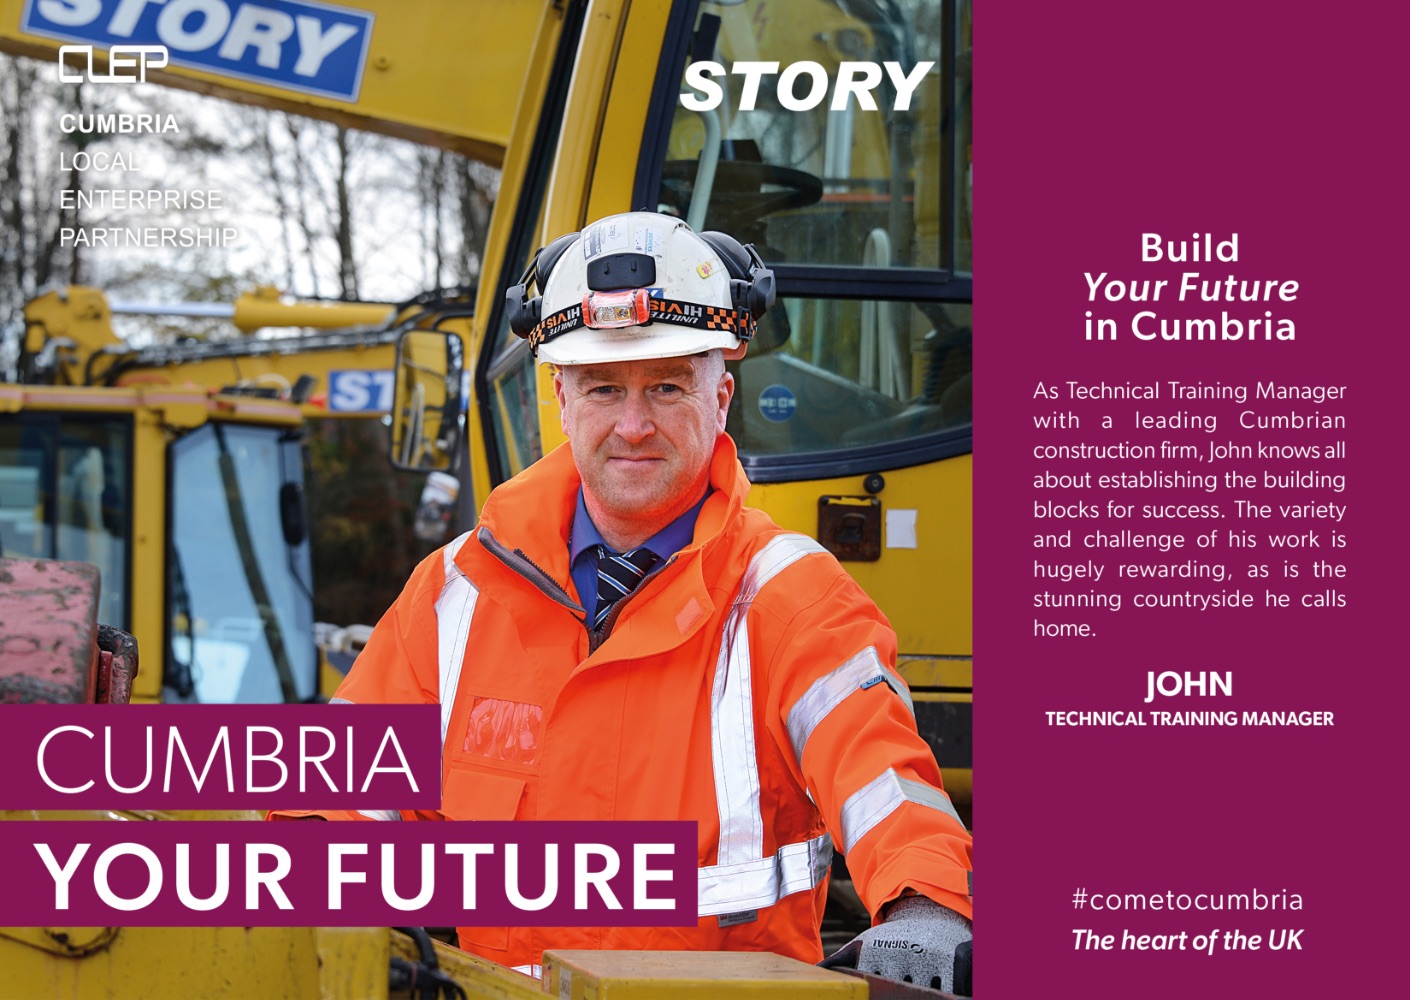 Build Your Future In Cumbria: As Technical Training Manager with a leading Cumbria construction firm, John knows all about establishing the building blocks for success. The variety and challenge of his work is hugely rewarding, as is the stunning countryside he calls home. (Photo: John, technical training manager).